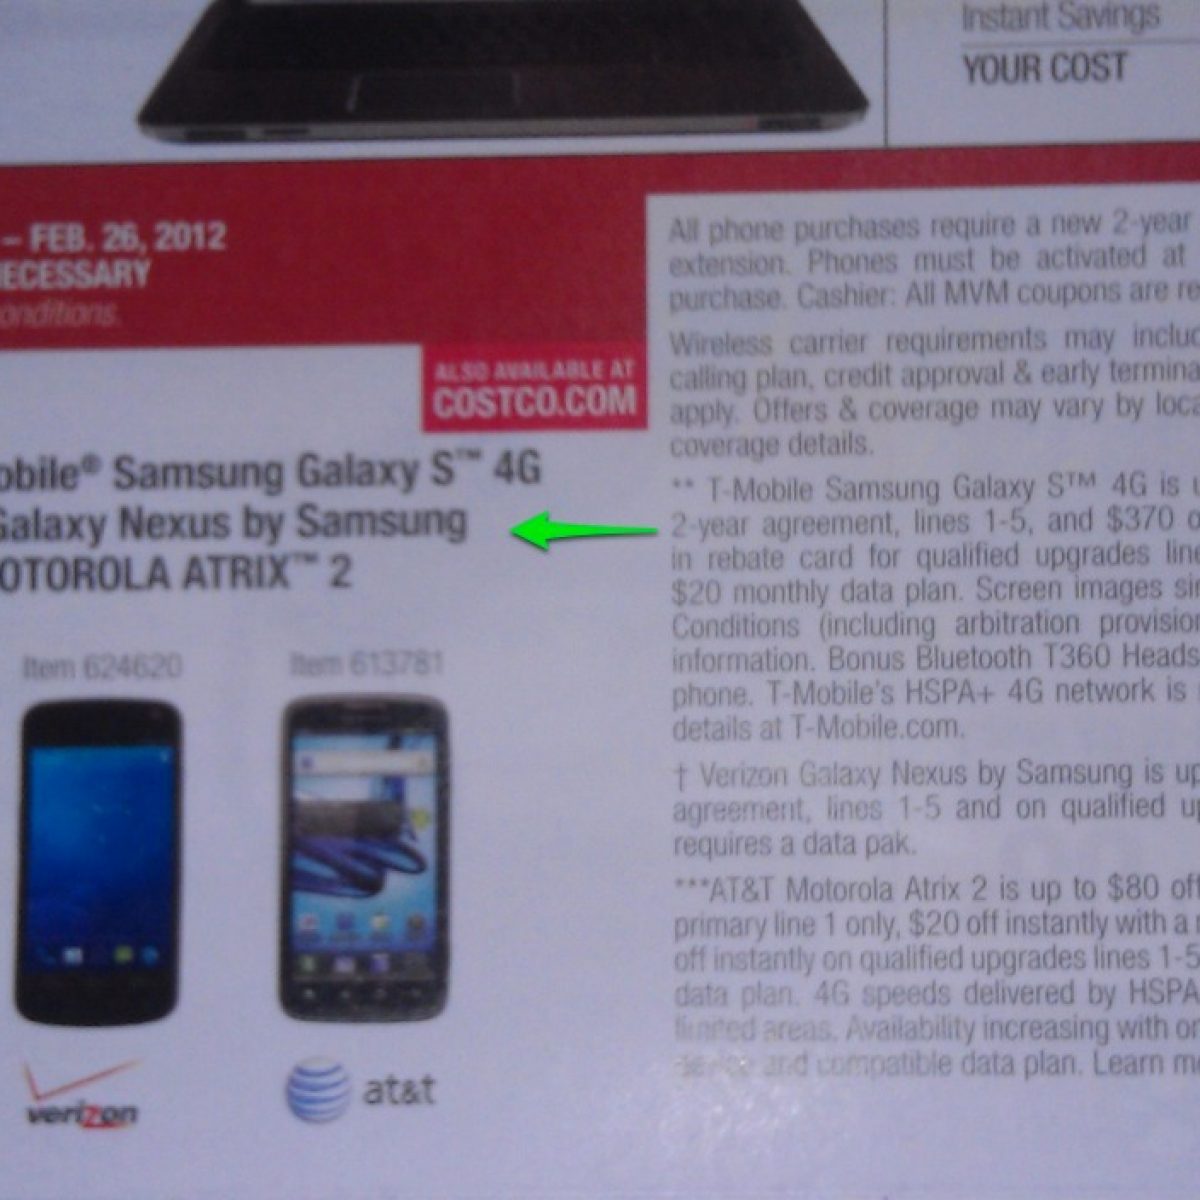 Costco To Offer 50 Discount On Galaxy Nexus From February 2 Through February 26